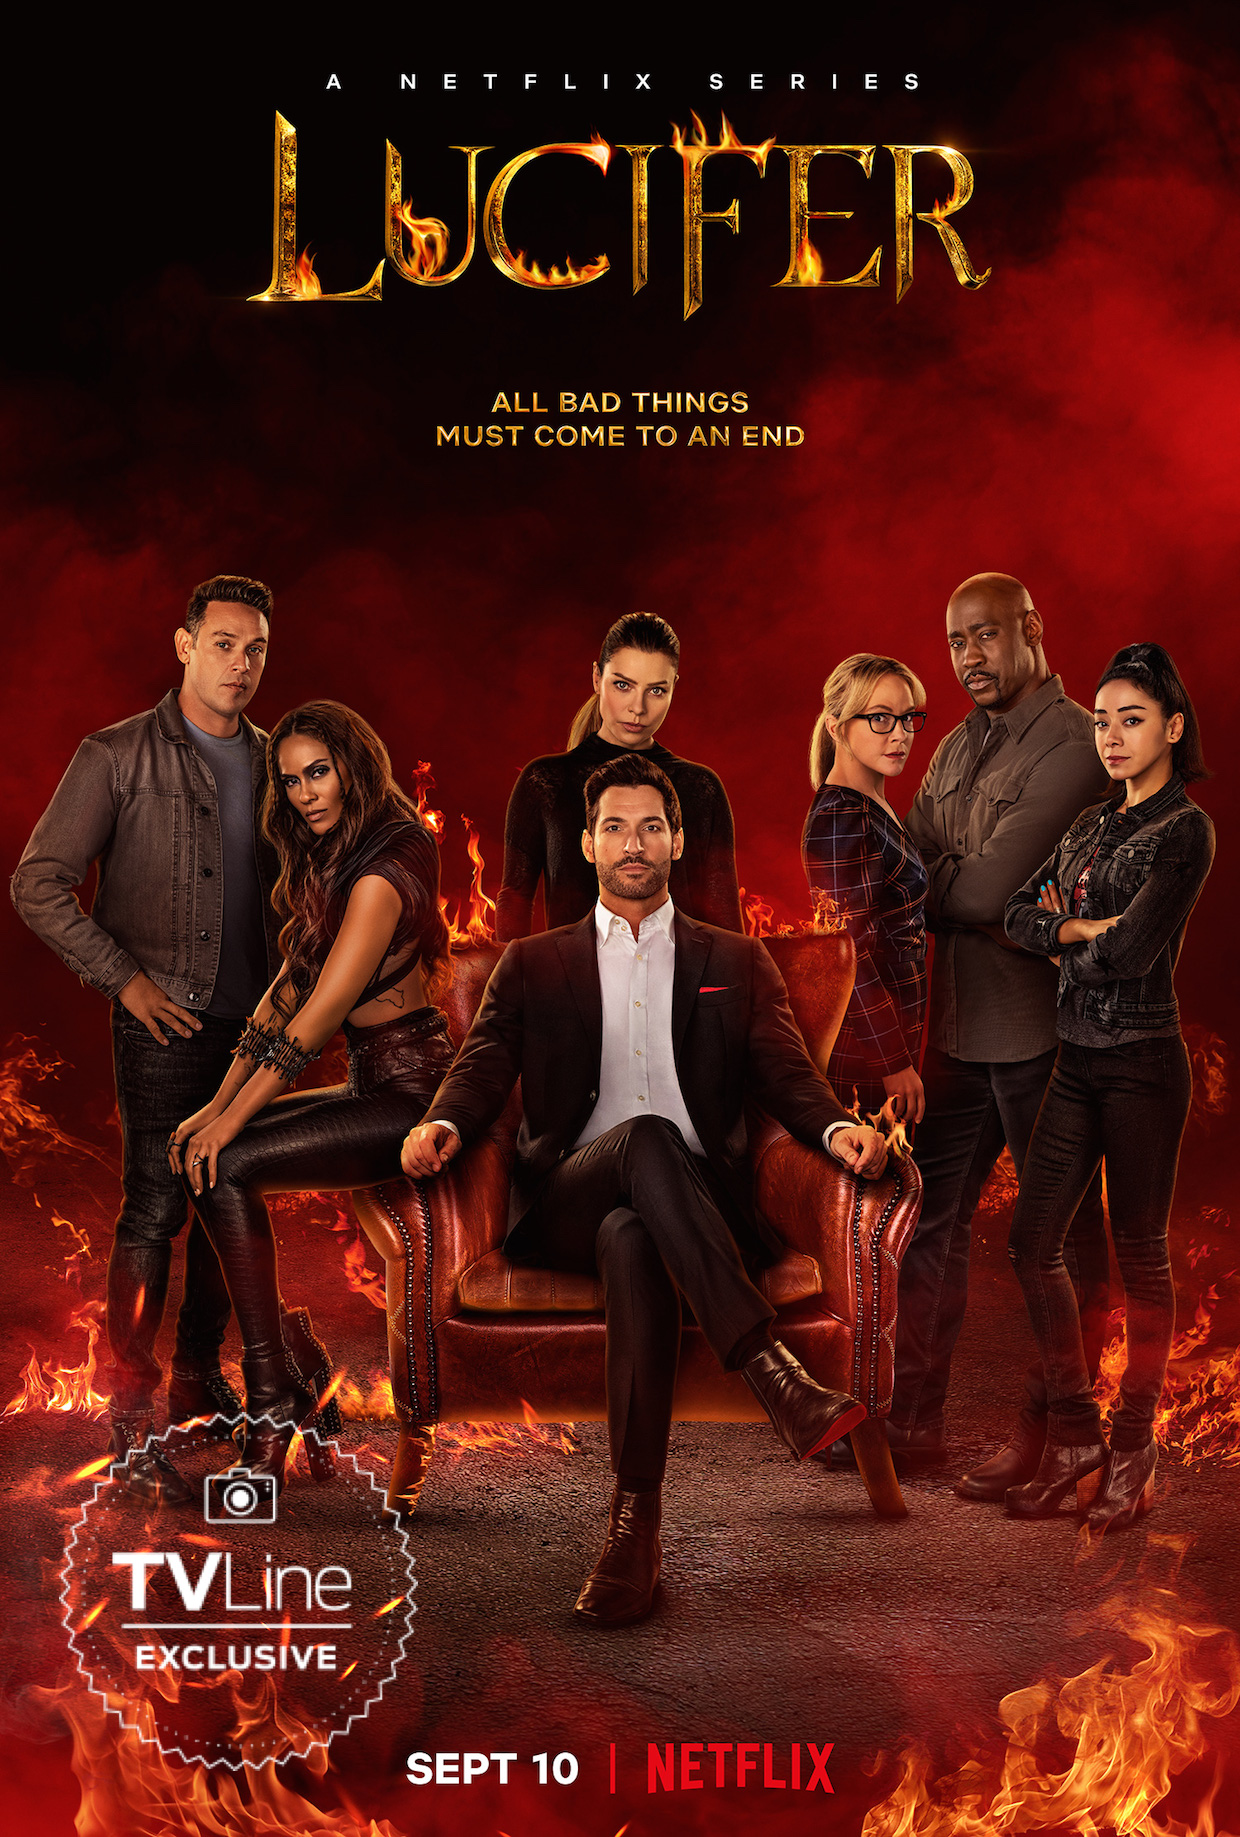 PHOTO 'Lucifer' Final Season 6 Poster: 'All Bad Things Must Come to an End'